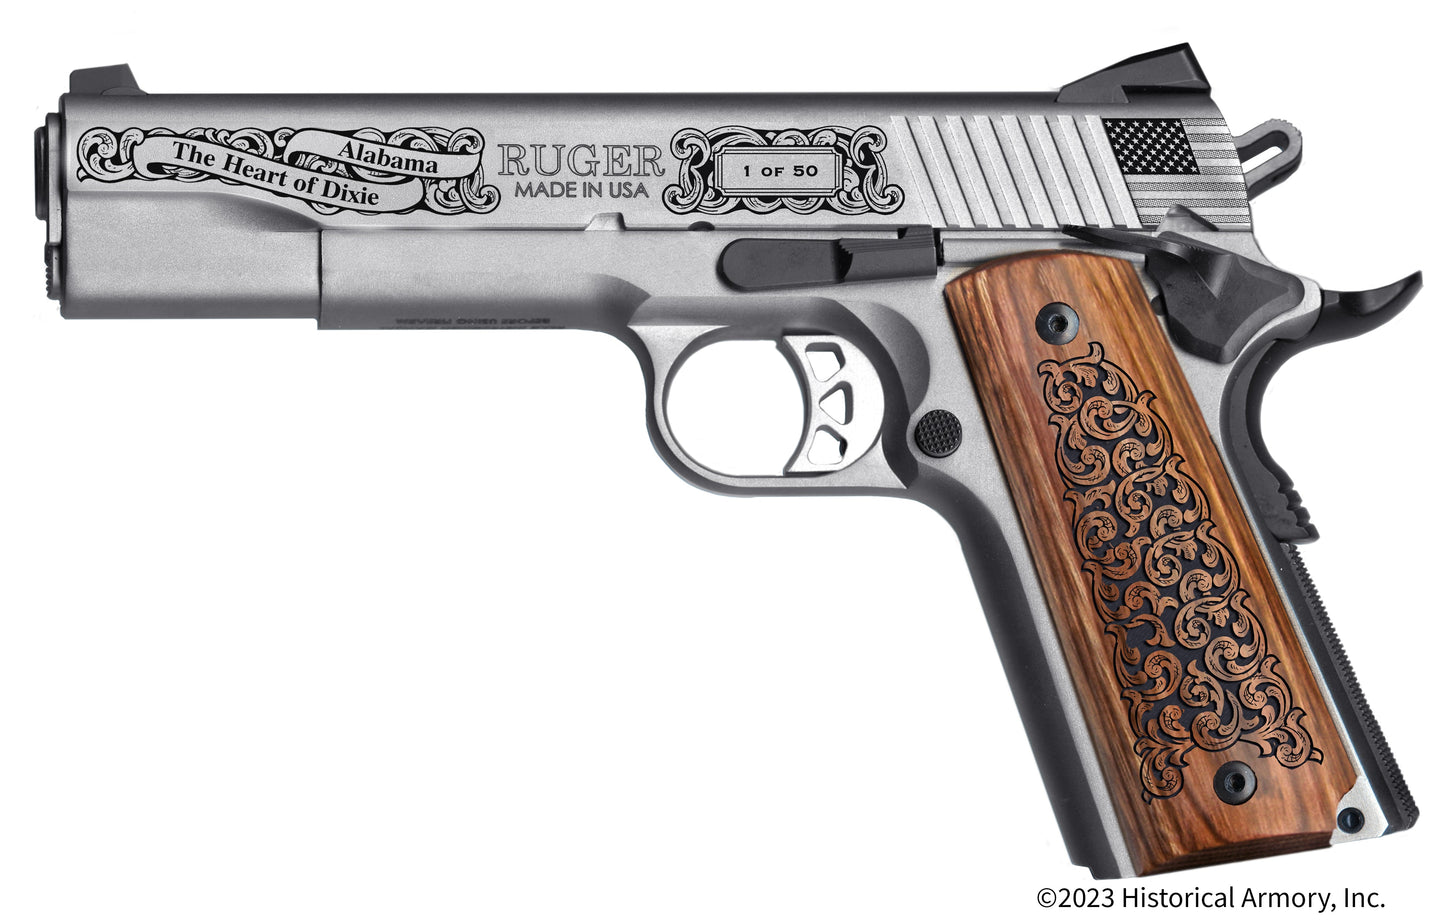 Winston  County Alabama Engraved .45 Auto Ruger 1911